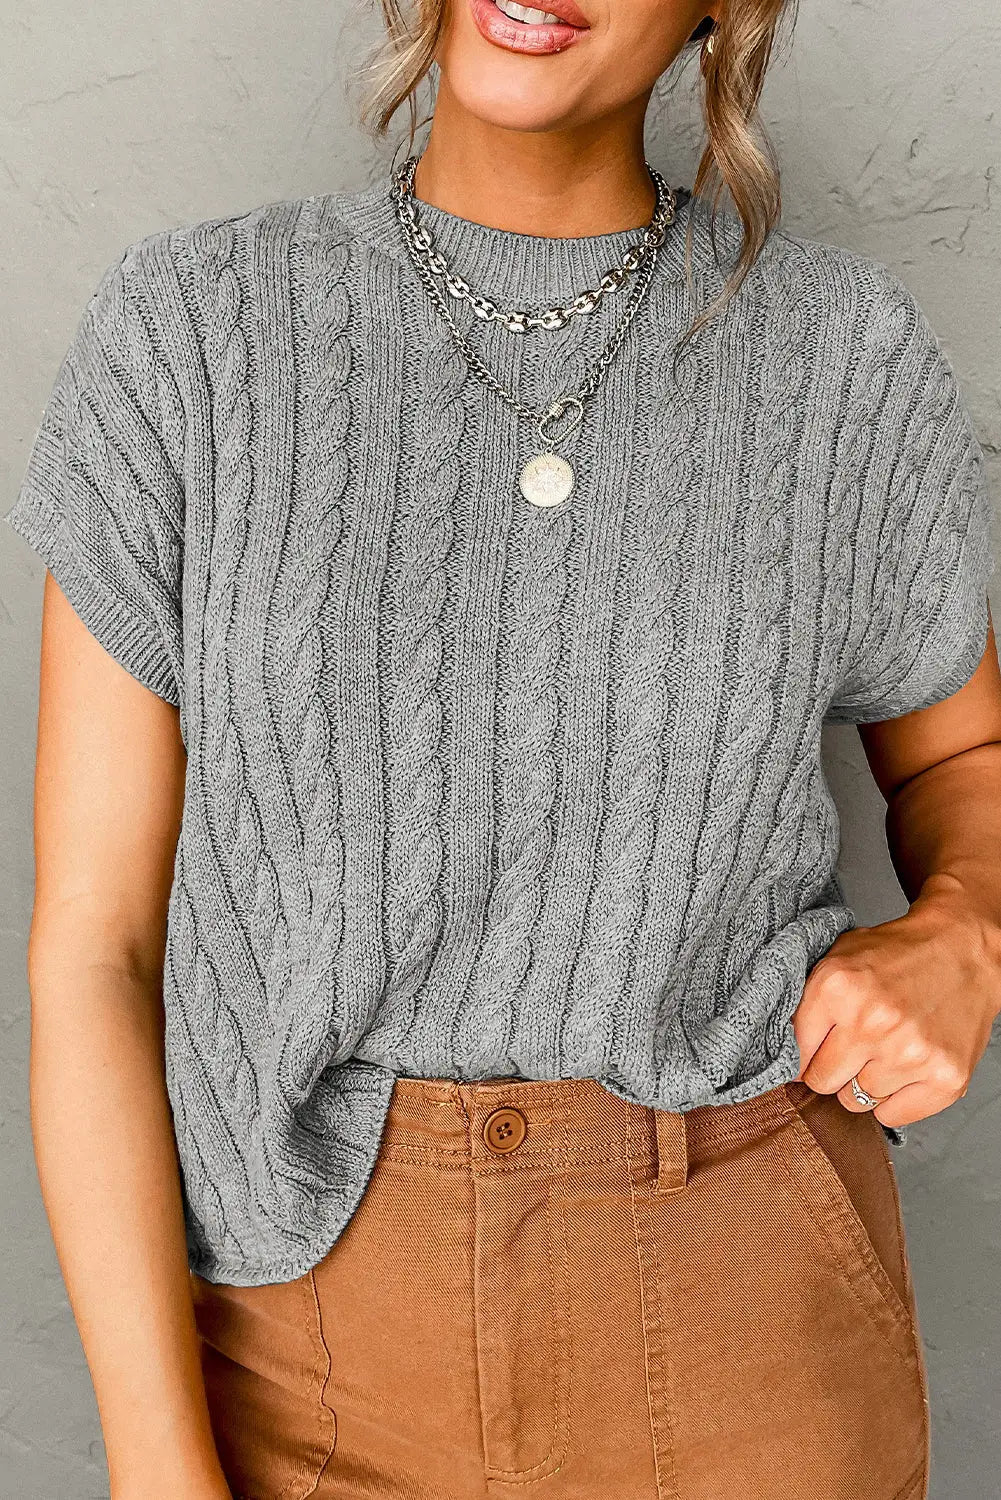 Gray crew neck cable knit short sleeve sweater - 2xl / 55% acrylic + 45% cotton - sweaters & cardigans